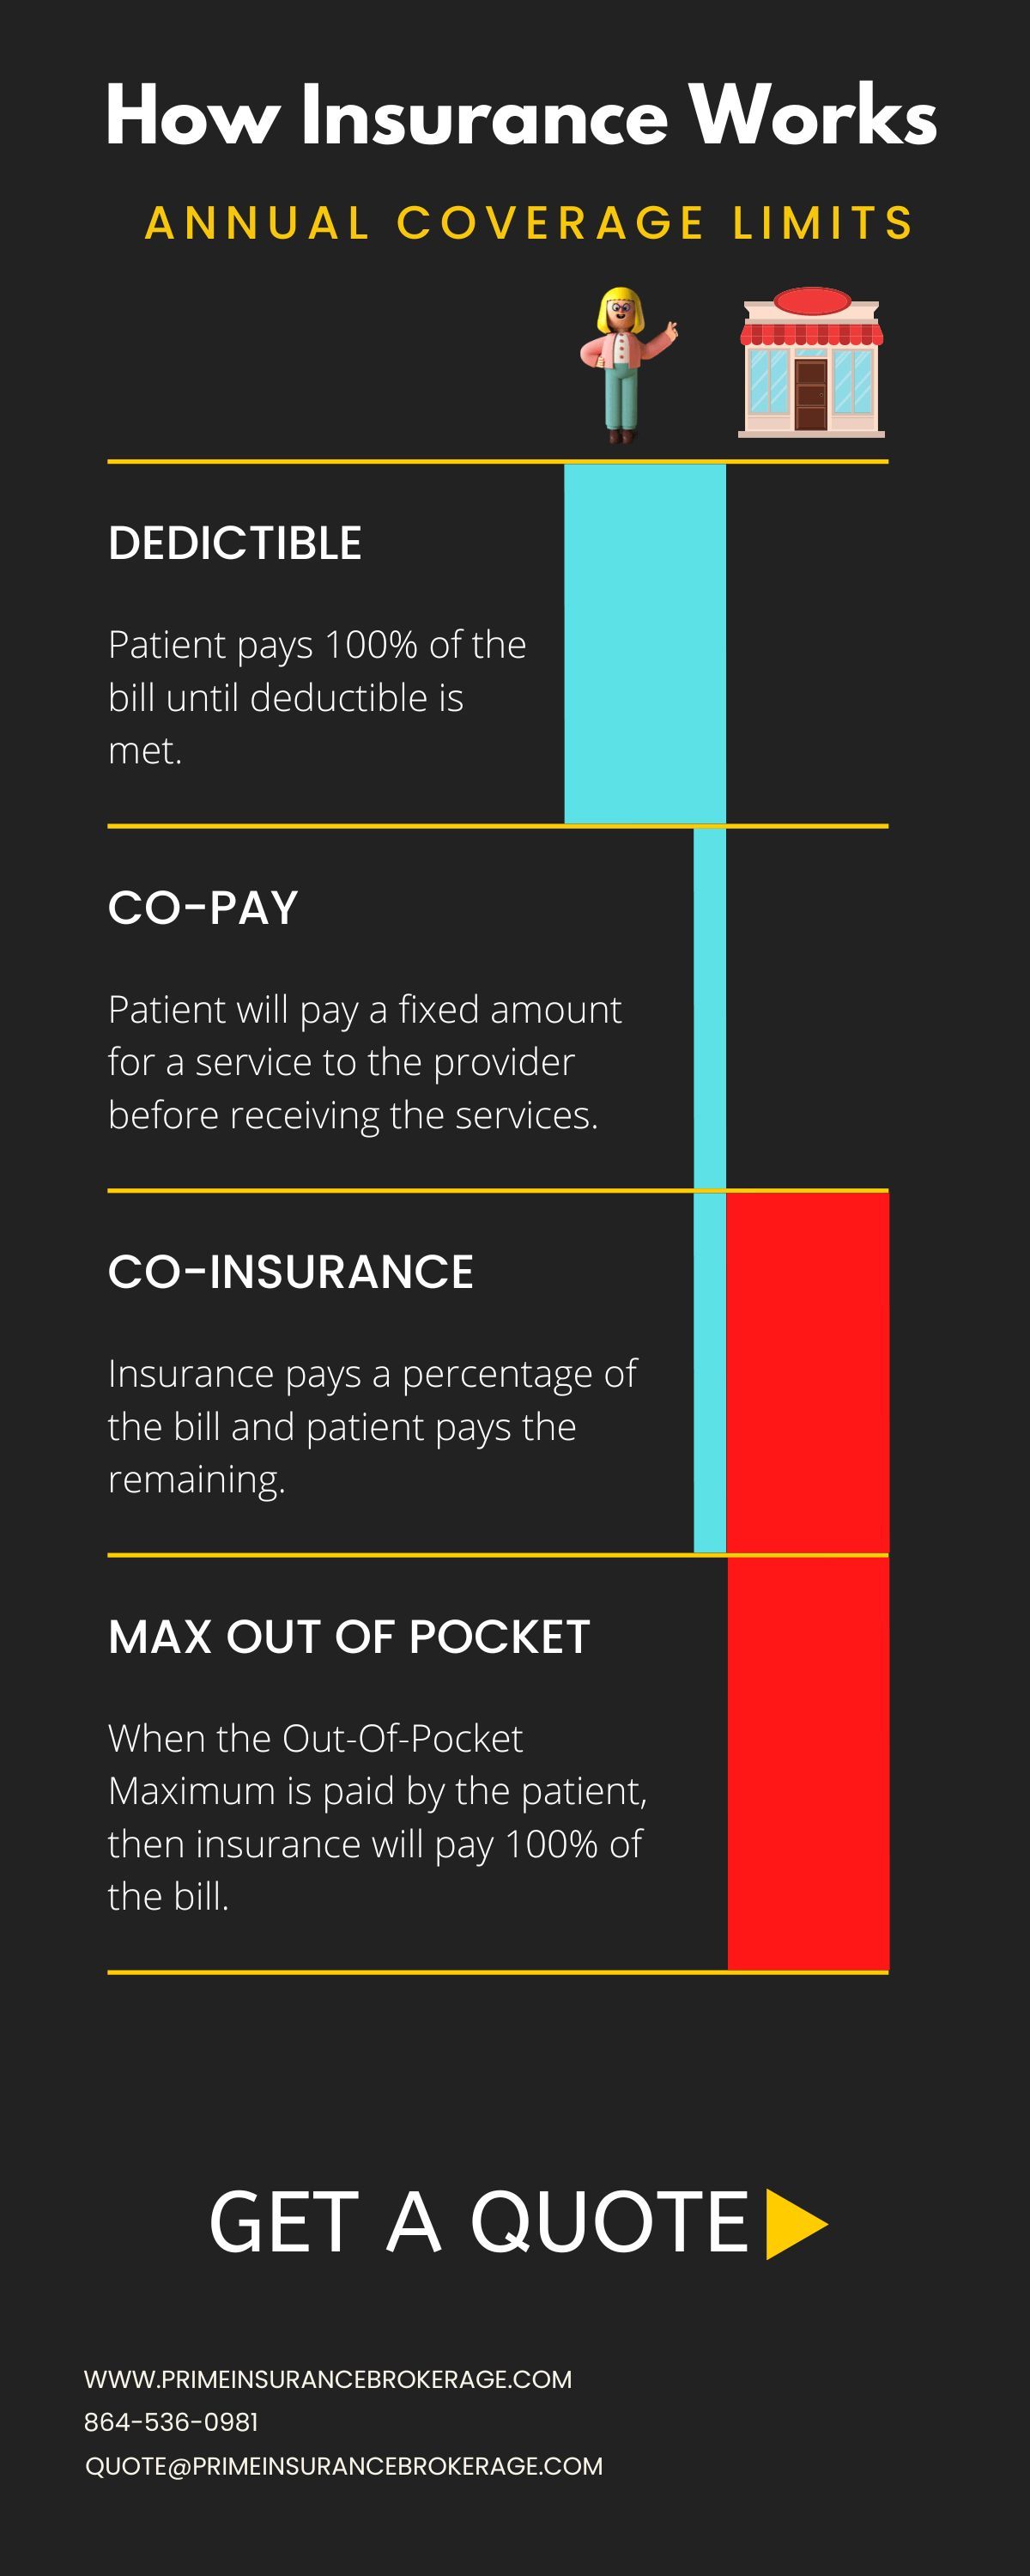 Infographic How Insurance Works Annual Coverage Limits, Deductible, Co-pay, Co-insurance, Max Out of Pocket Maximum, Prime Insurance Brokerage Prime Insurance Brokerage 1099 self-employed Florida FL Georgia GA South Carolina SC North Carolina NC Texas TX Tennessee TN Obamacare Affordable Care Act ACA Medical Individual Major Accident hospitalization dental PPO HMO EPO Short term child Cheap Free